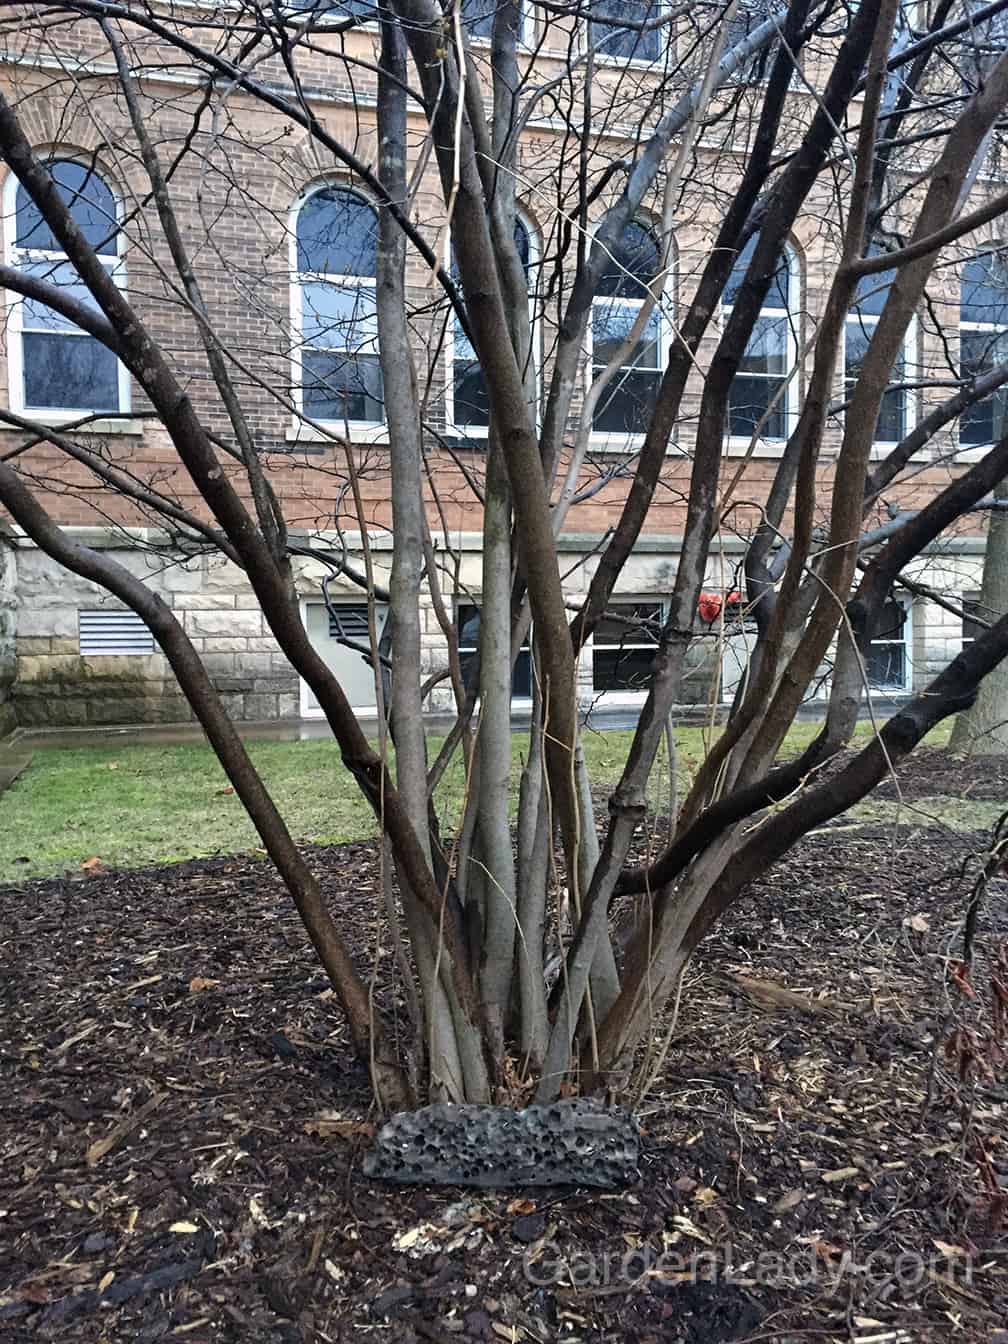 I put the small section that broke off under a shrub at the University by "Old Main." The landscapers might have swept it away by now, but I could imagine my father smiling as I snuck it under this bush near the parking lot.